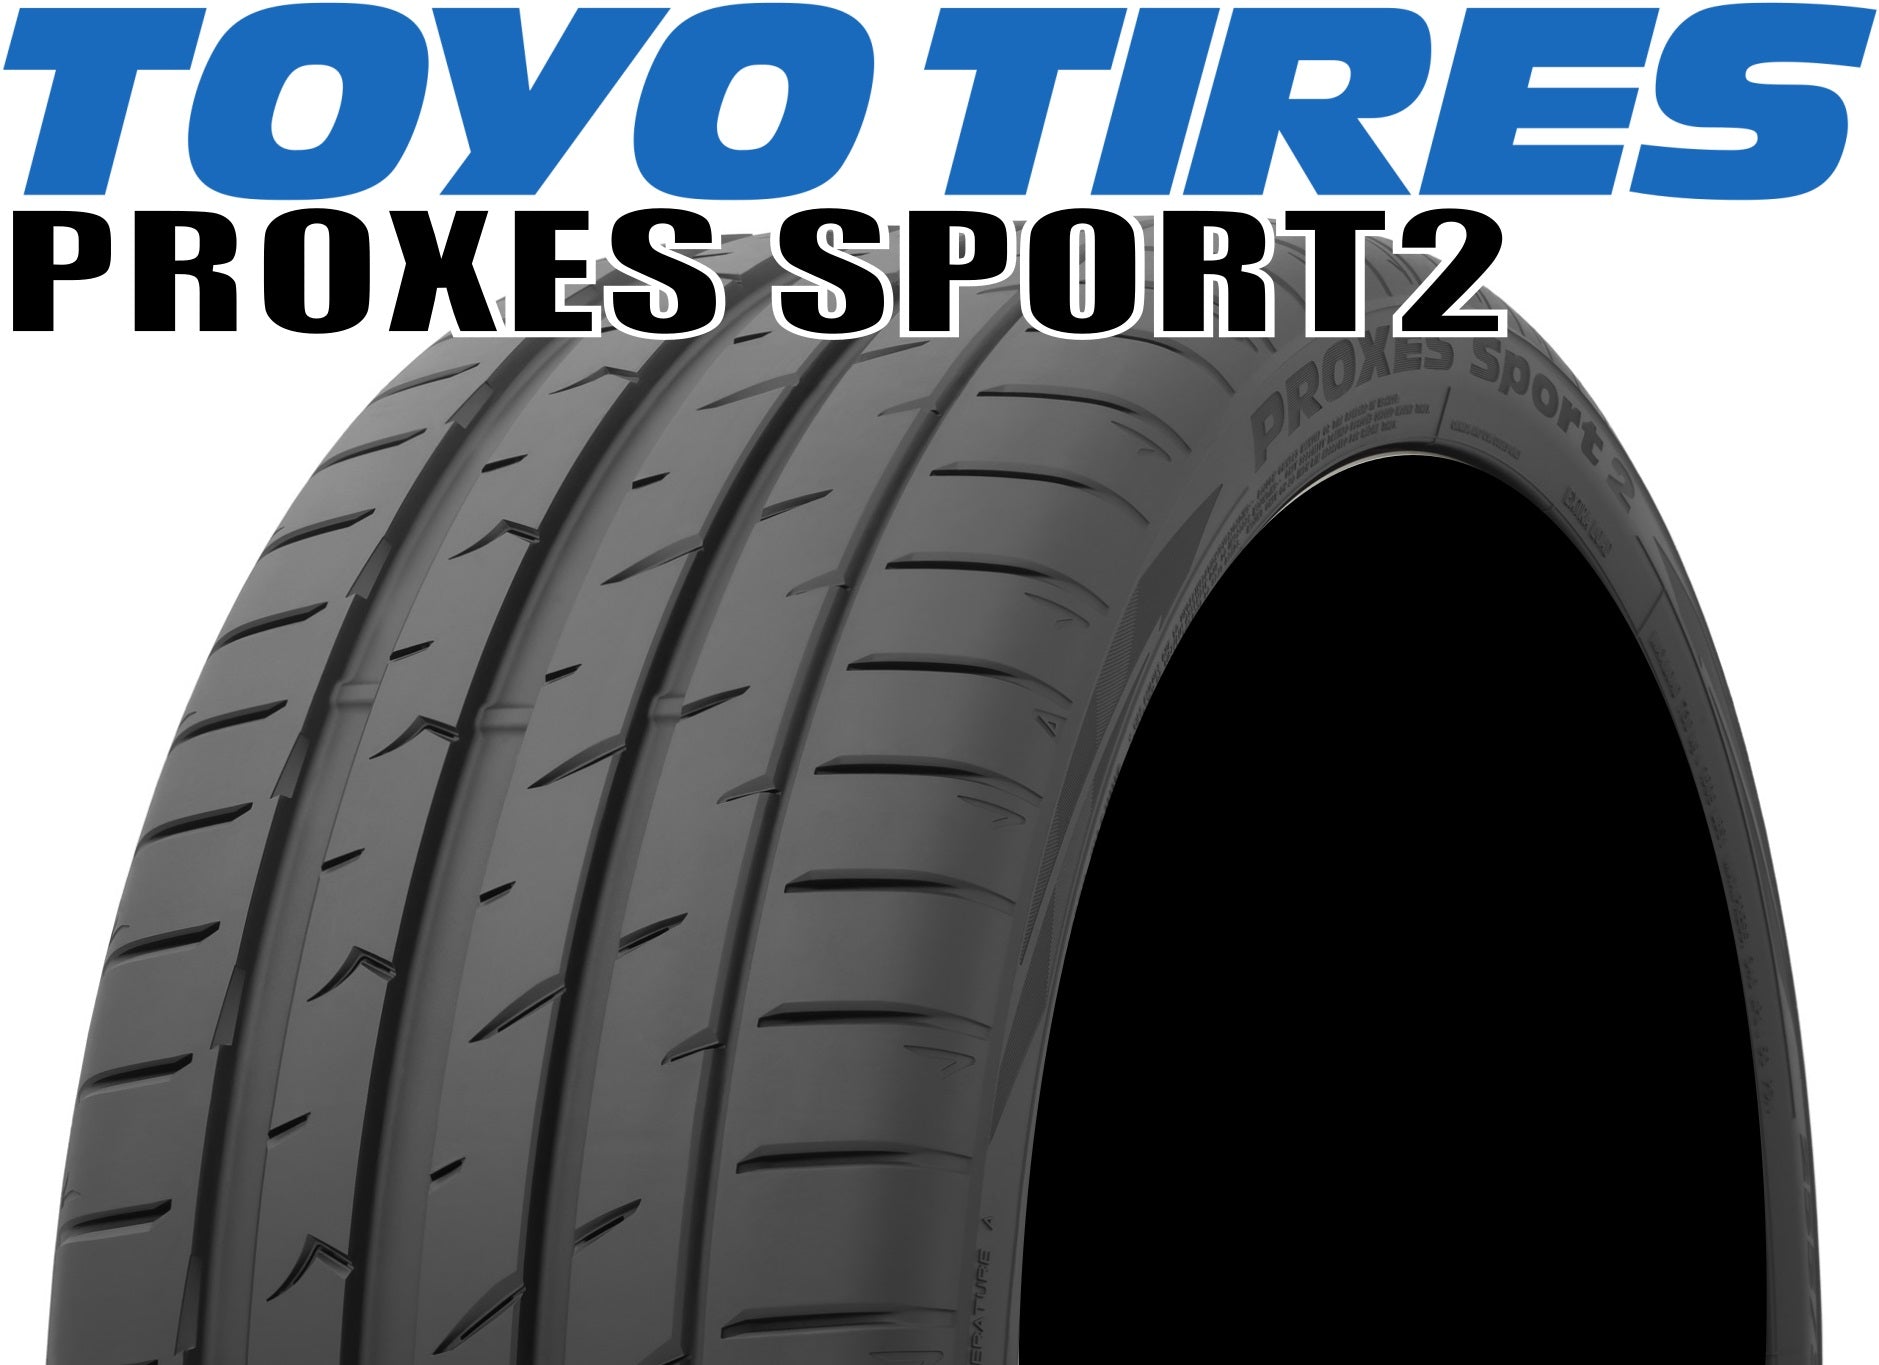 TOYO TIRES PROXES SPORT2(トーヨー プロクセススポーツ) 245/45R20 103Y 245/45-20 –  ハマガレネットストア